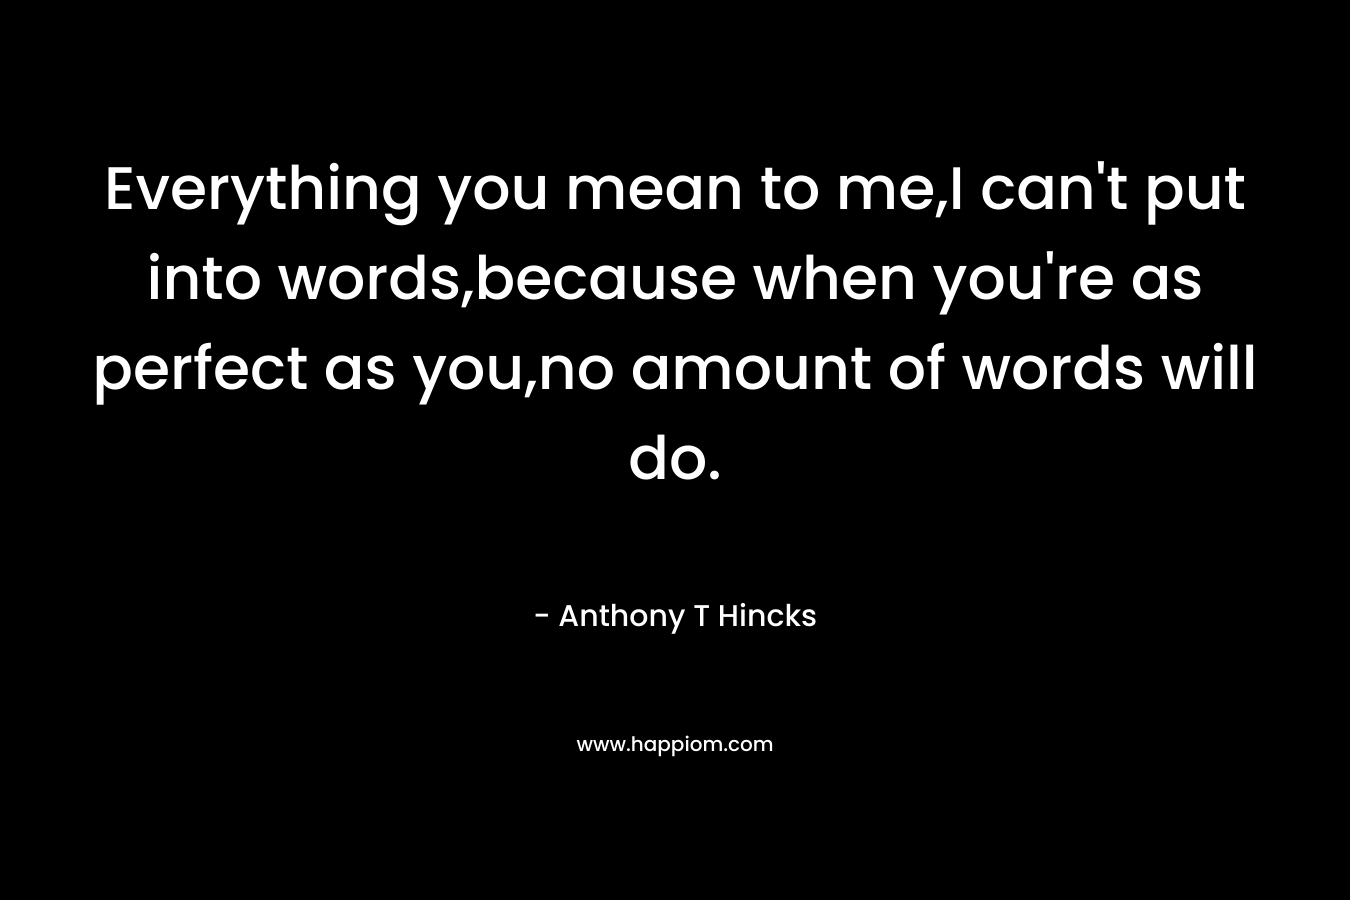 Everything you mean to me,I can’t put into words,because when you’re as perfect as you,no amount of words will do. – Anthony T Hincks